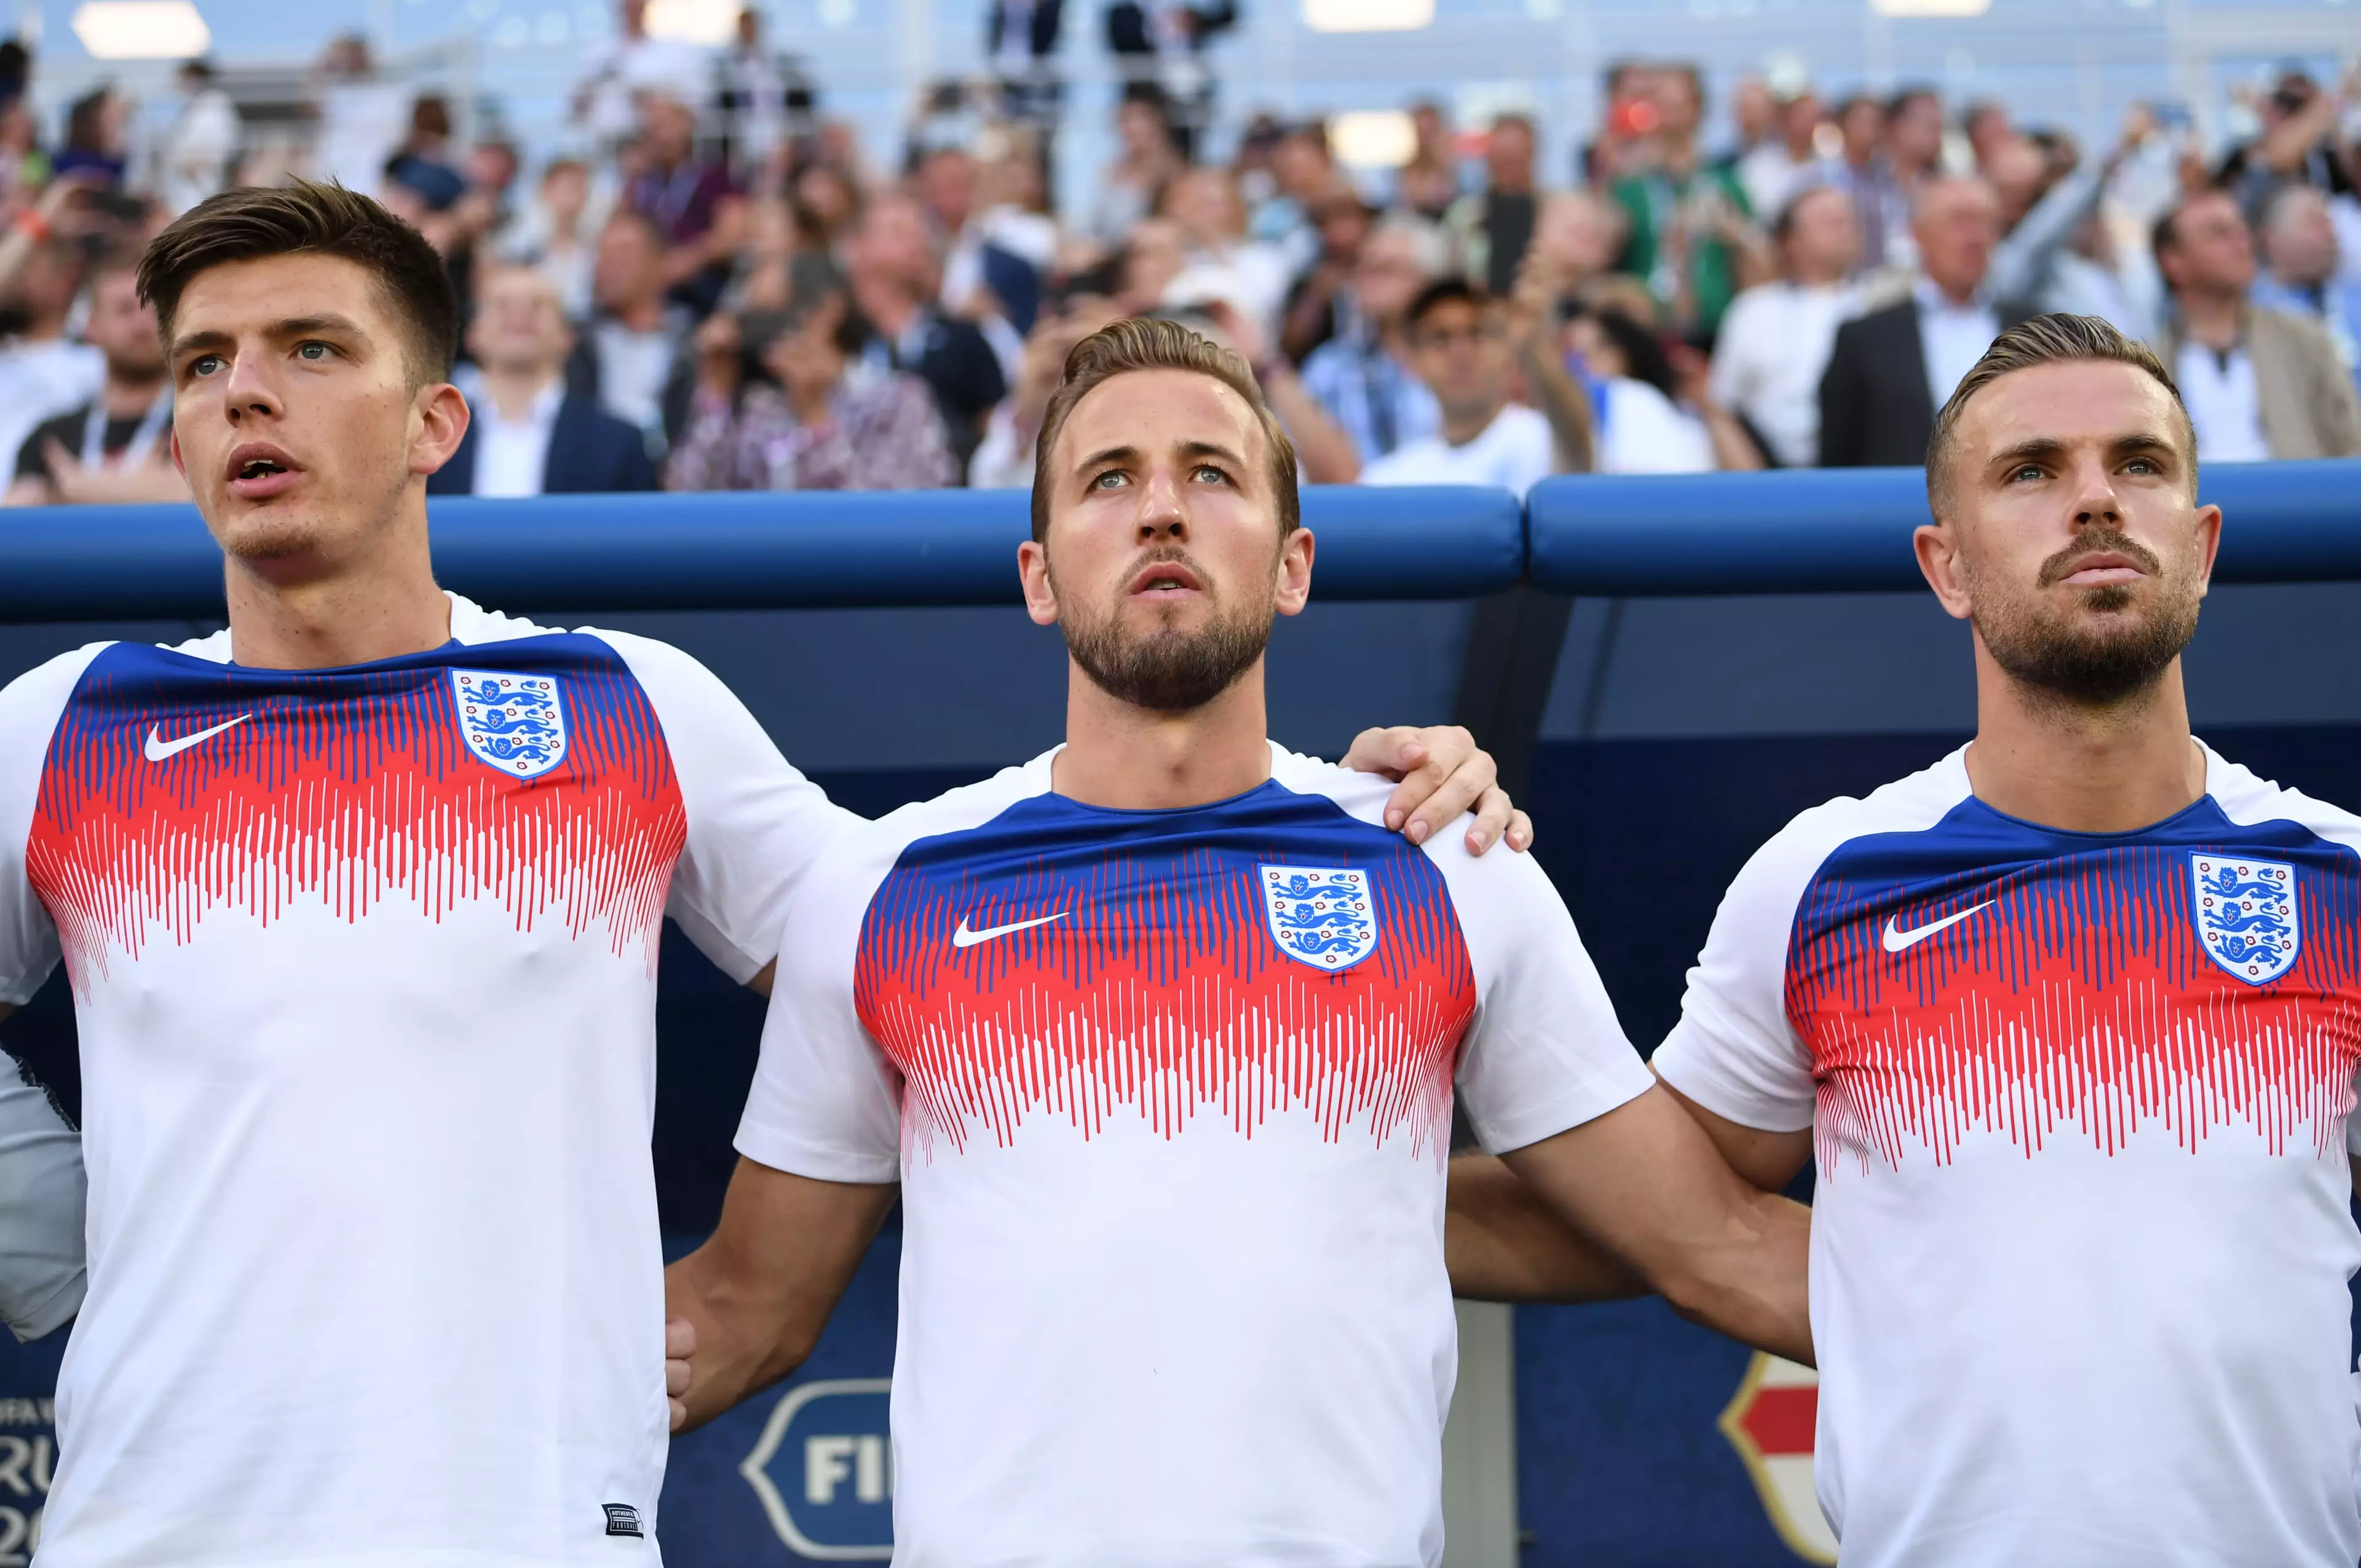 The Entire England Squad Donate Their World Cup Fees To Charity